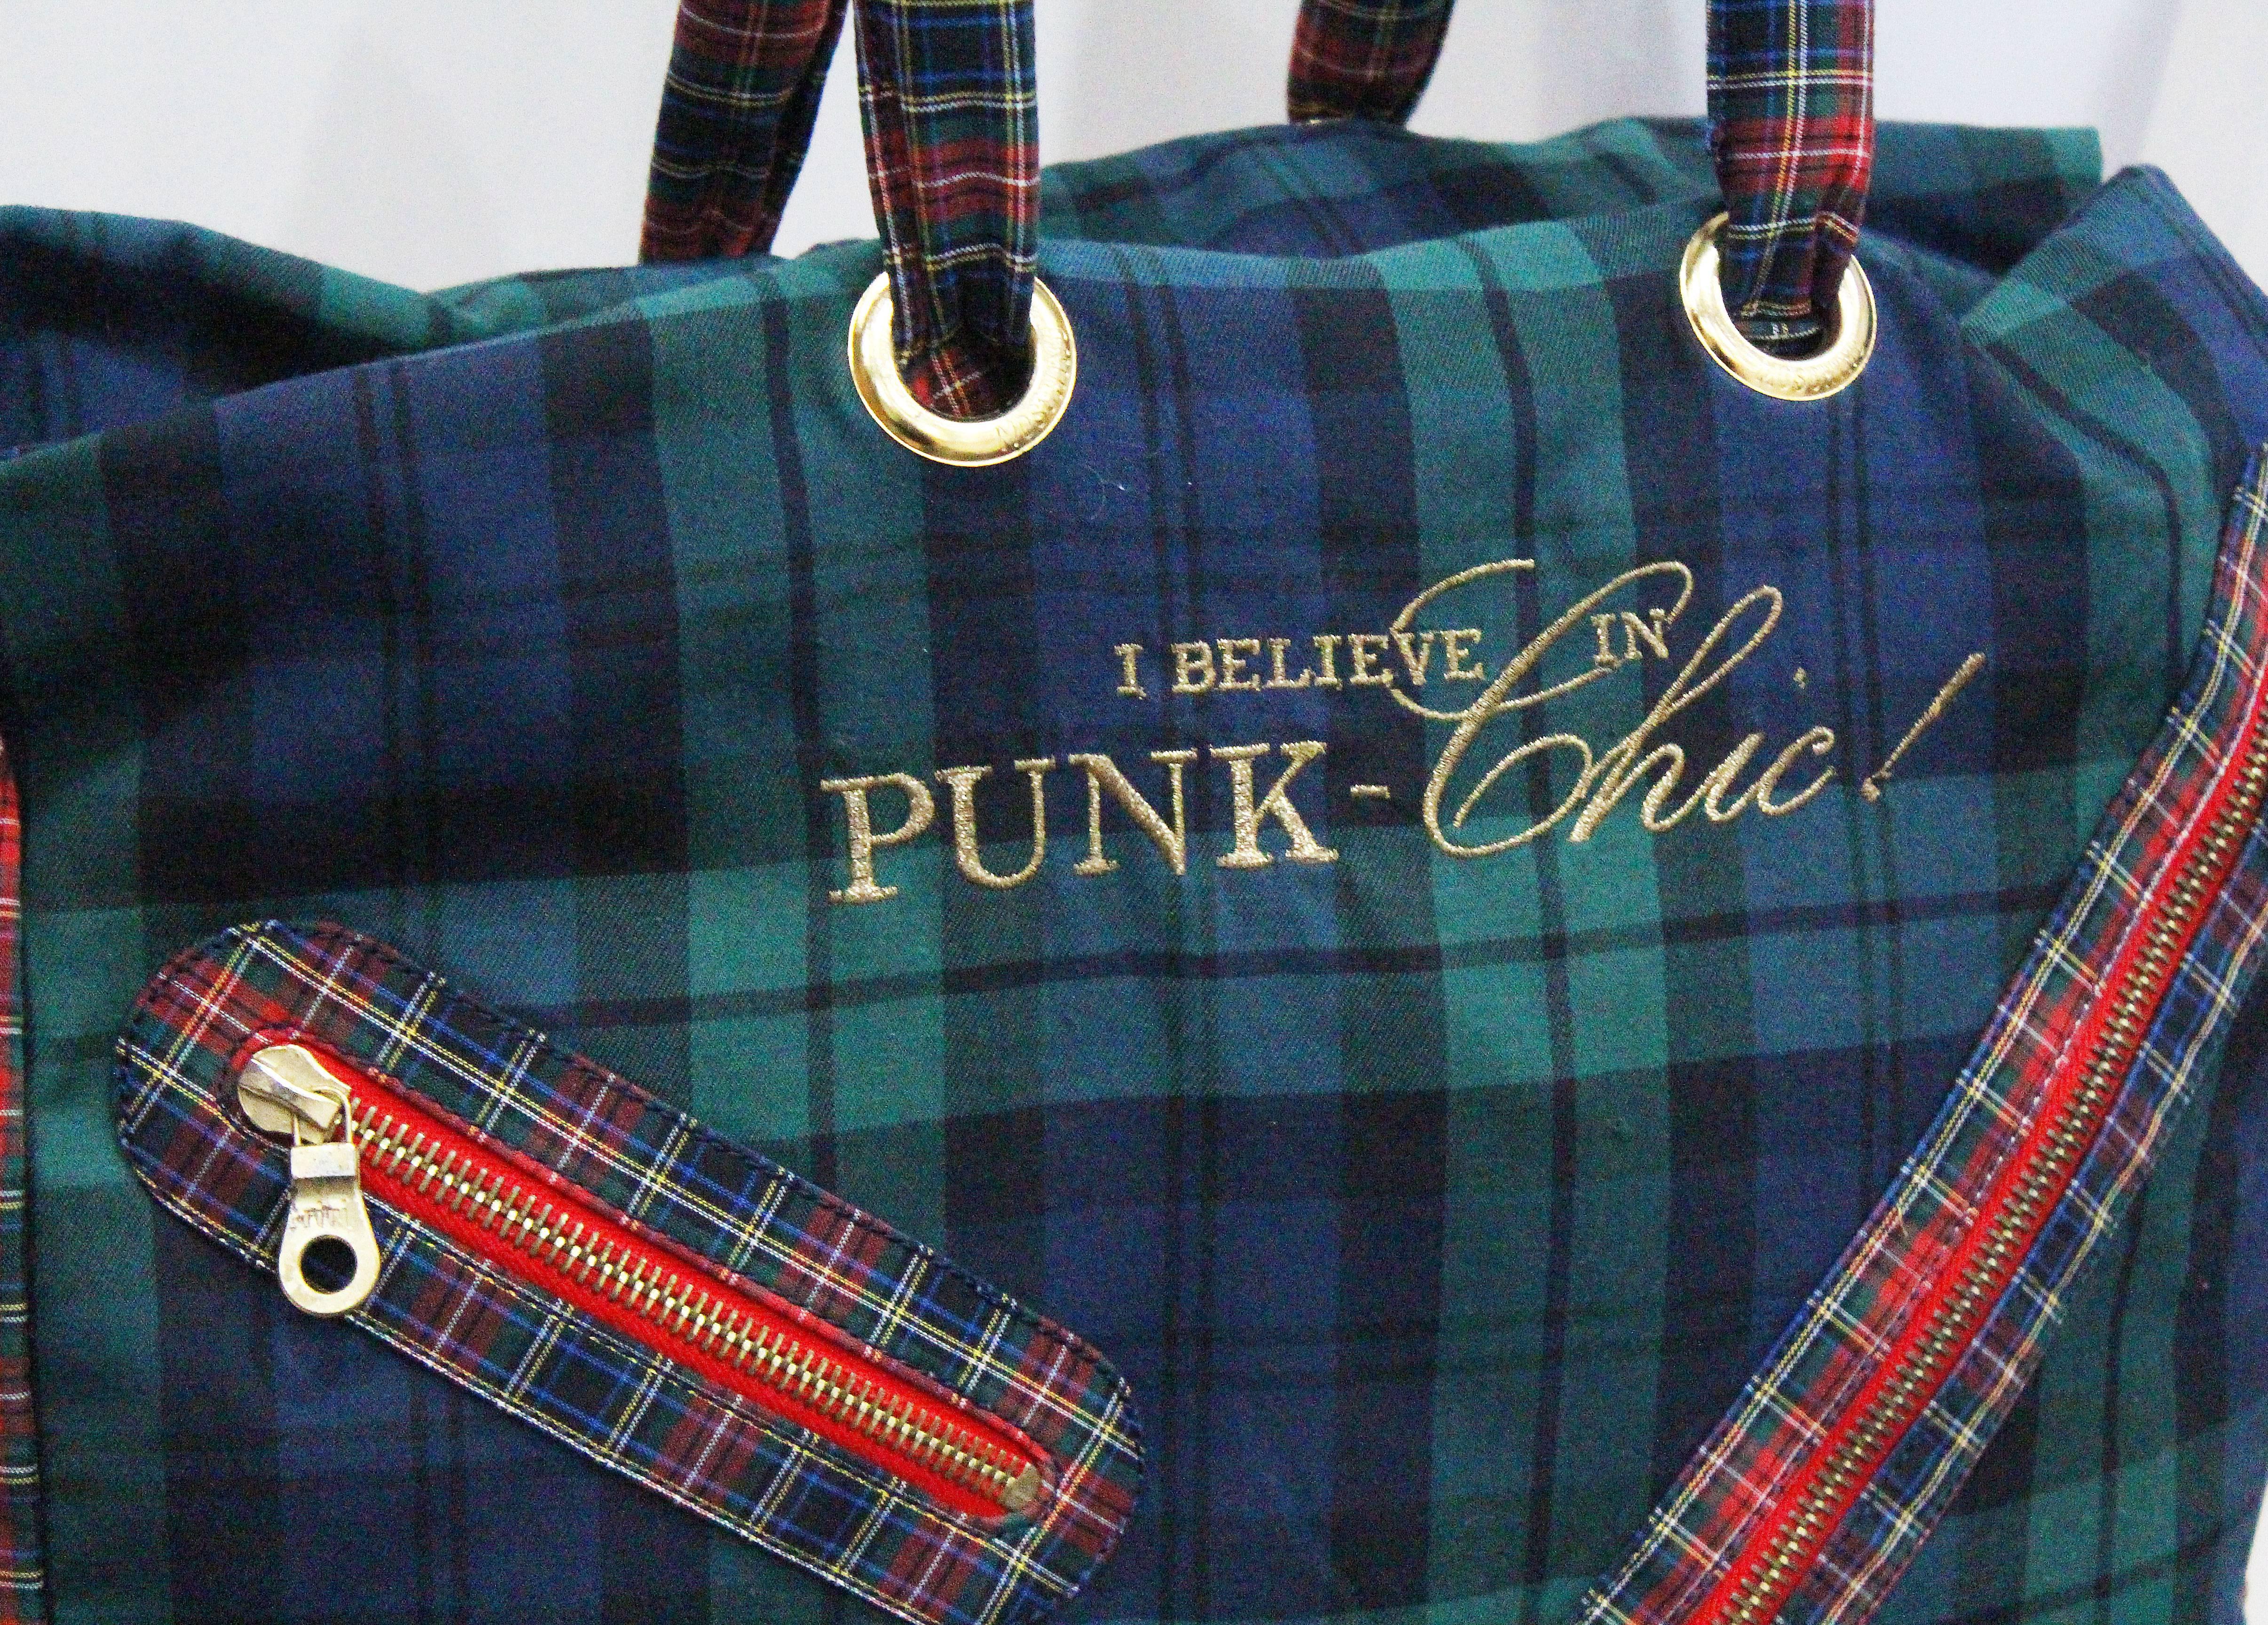 A Moschino large tote bag and matching purse from the early 1990s. The bag is in a mix match tartan print and features two top handles, large safety-pin zipper, and a gold embroidered 'I BELIEVE IN PUNK CHIC!' motif. 

